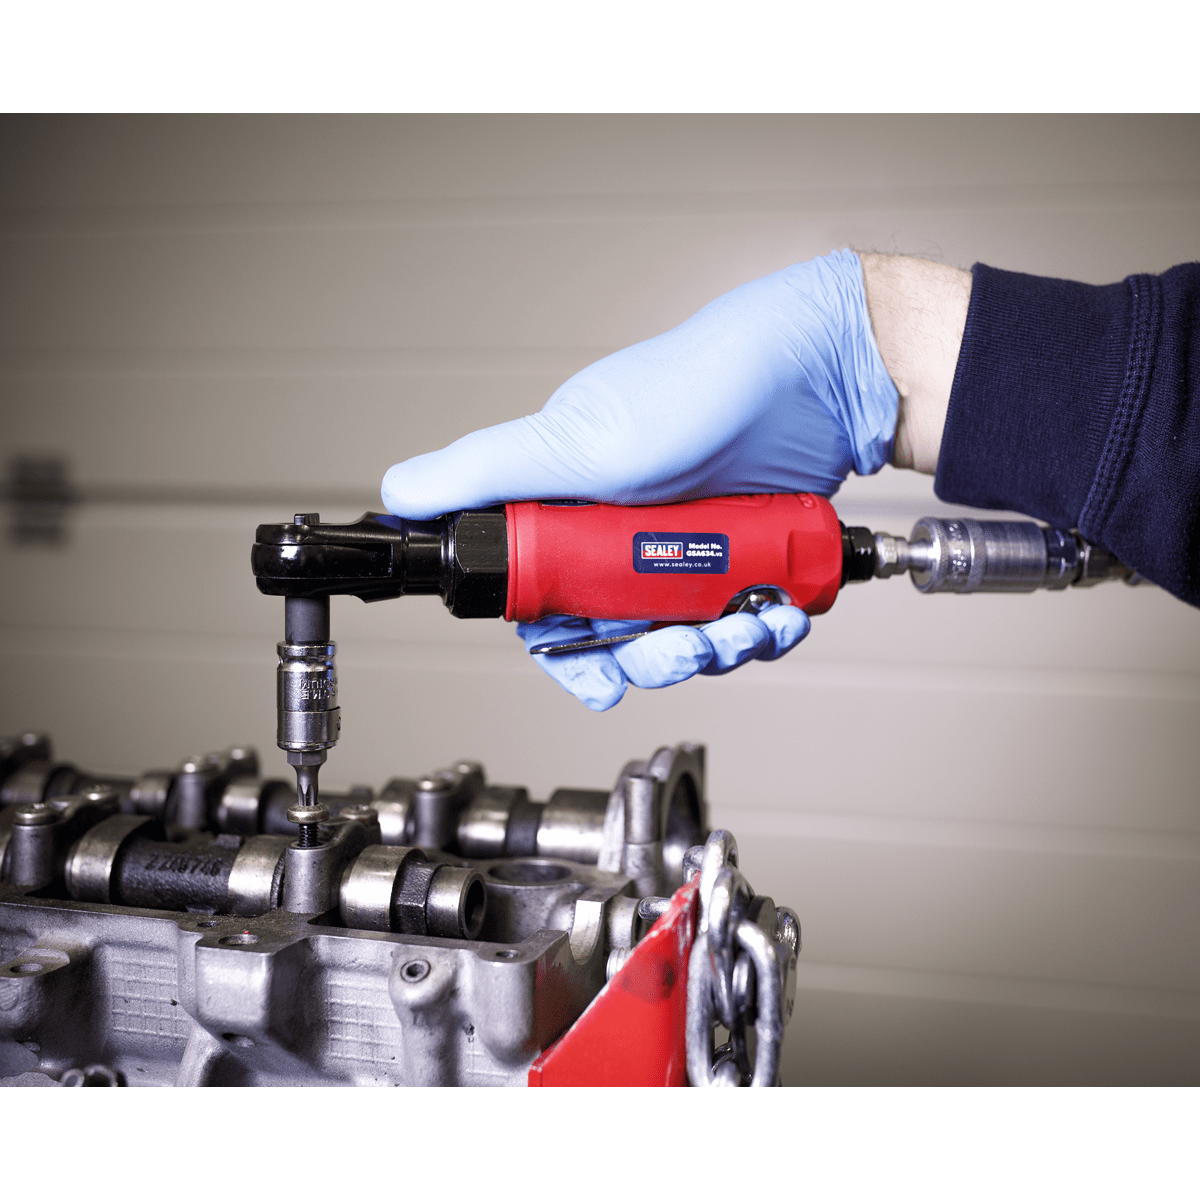 Compact Air Ratchet Wrench 1/4"Sq Drive | Generation Series compact air ratchet wrench. | toolforce.ie